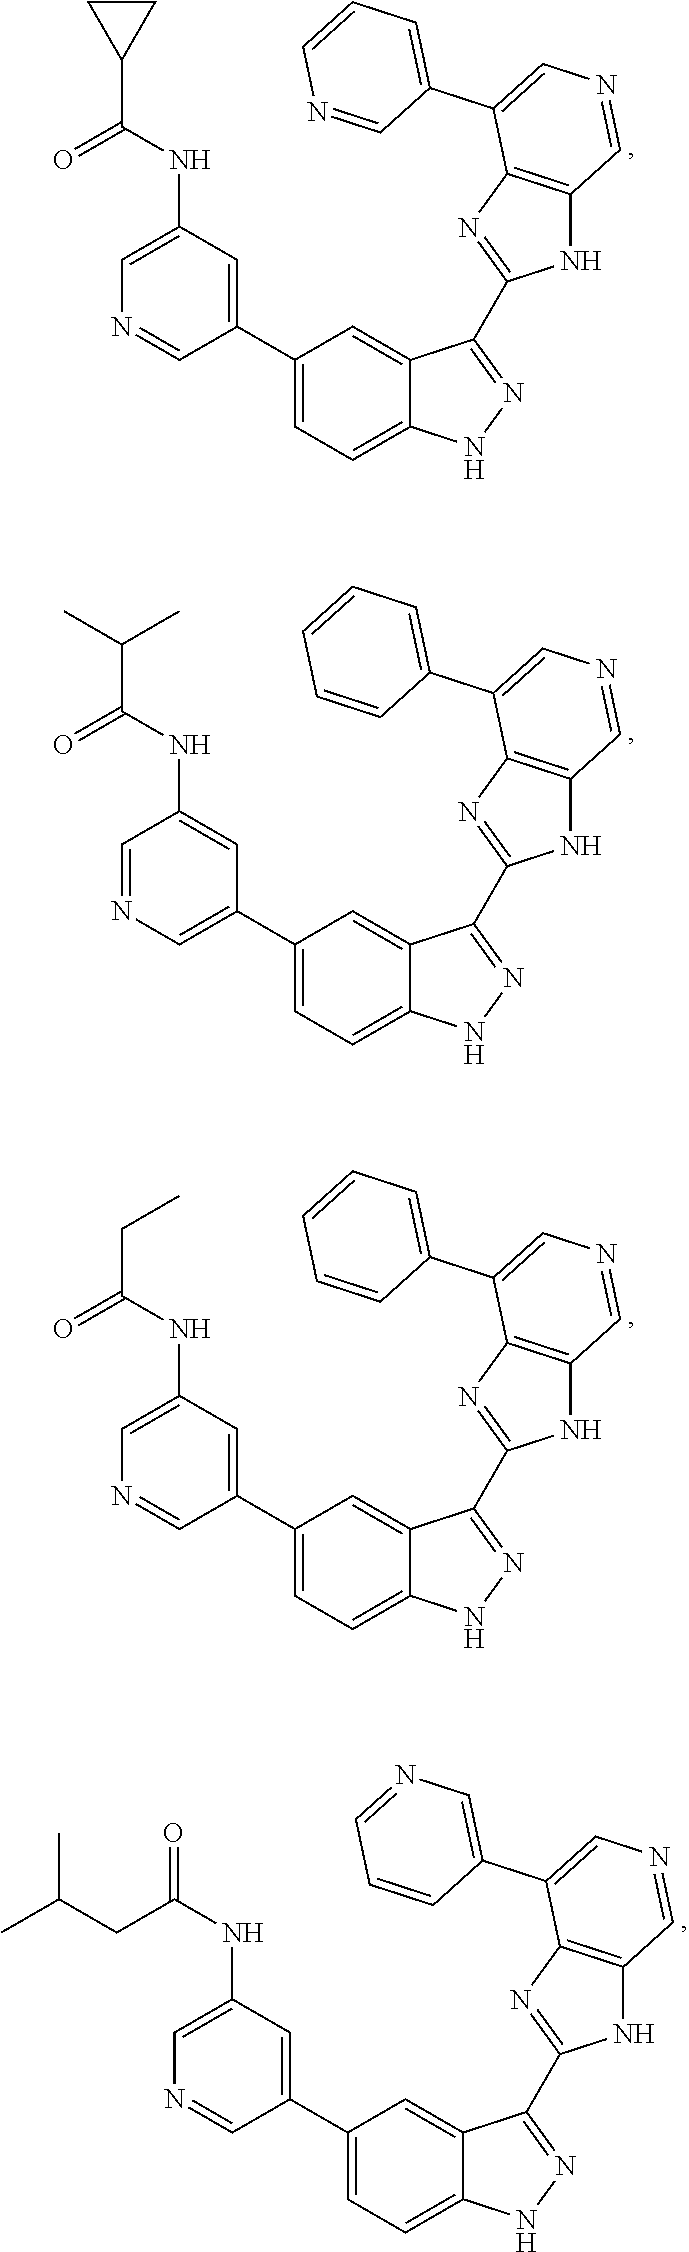 Indazole inhibitors of the Wnt signal pathway and therapeutic uses thereof